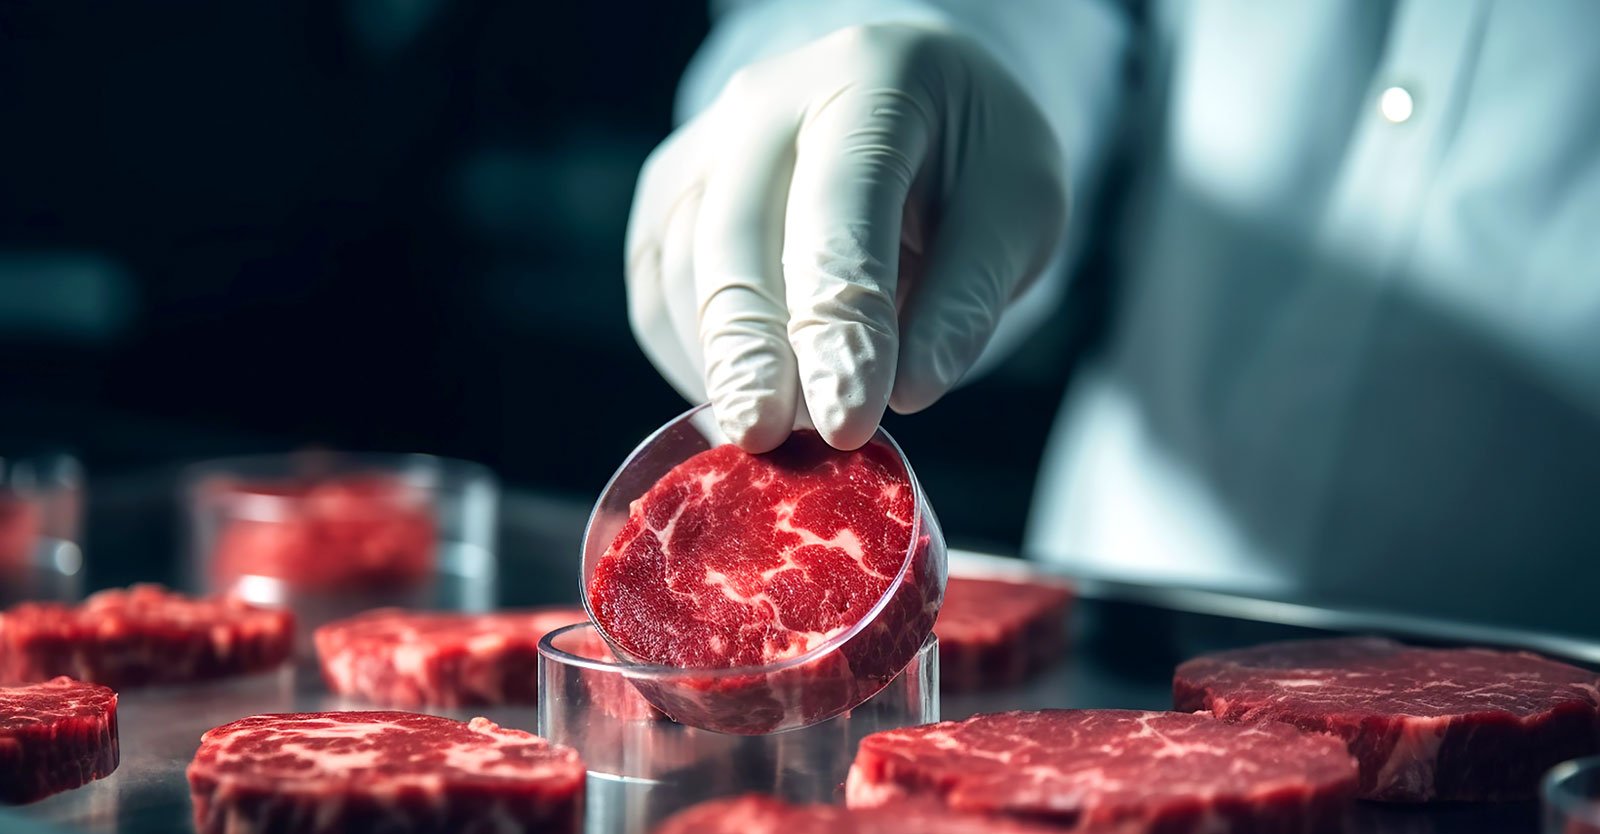 Lab-Grown Meat’s Dirty Secrets: No Oversight, Rampant Bacteria